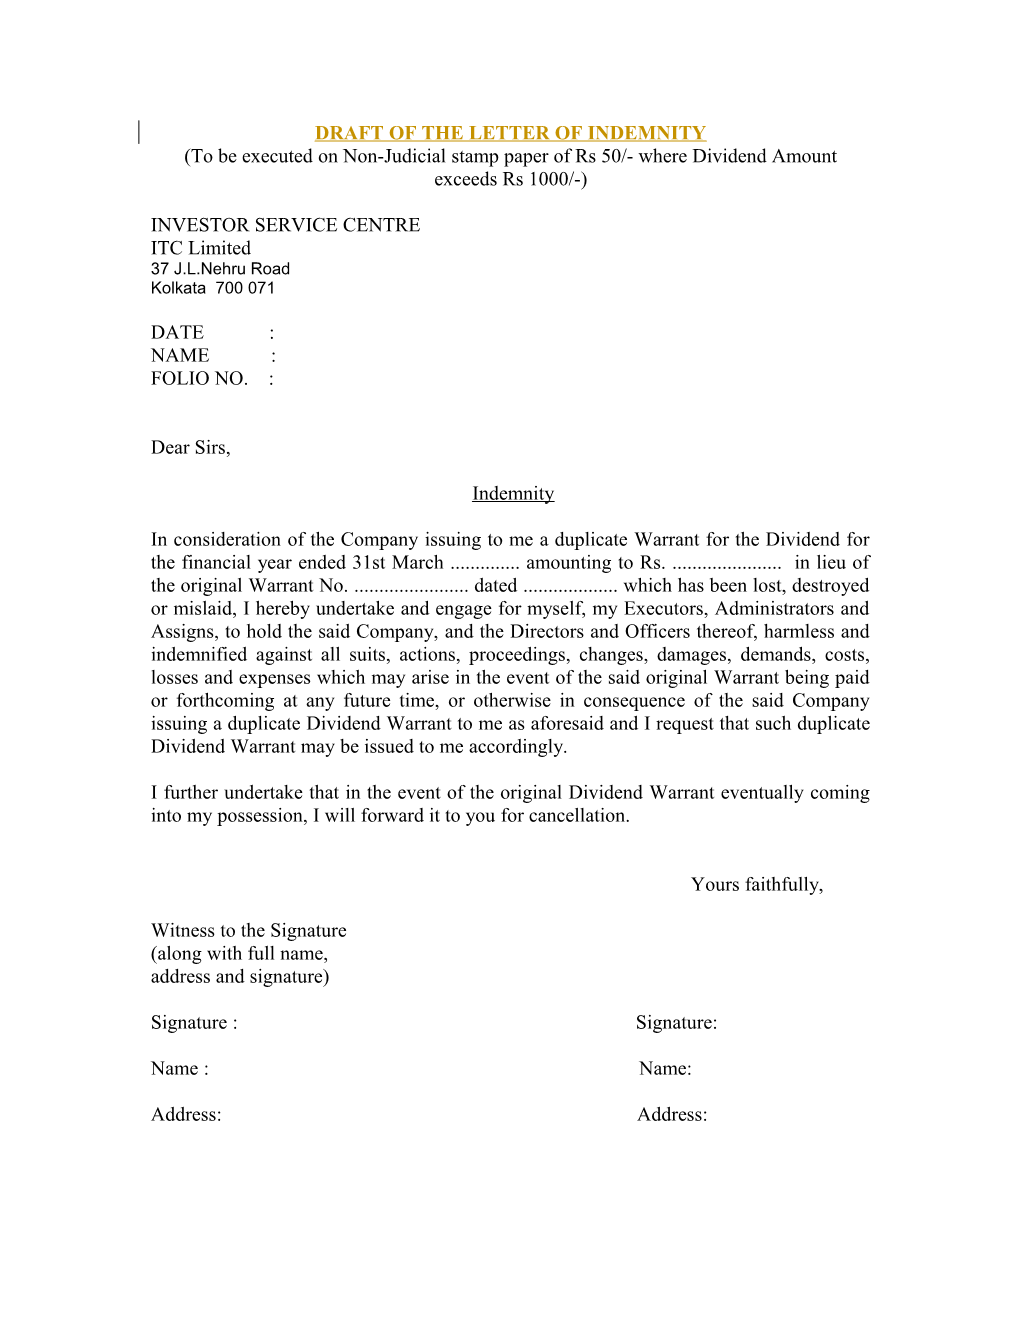 Draft of the Letter of Indemnity